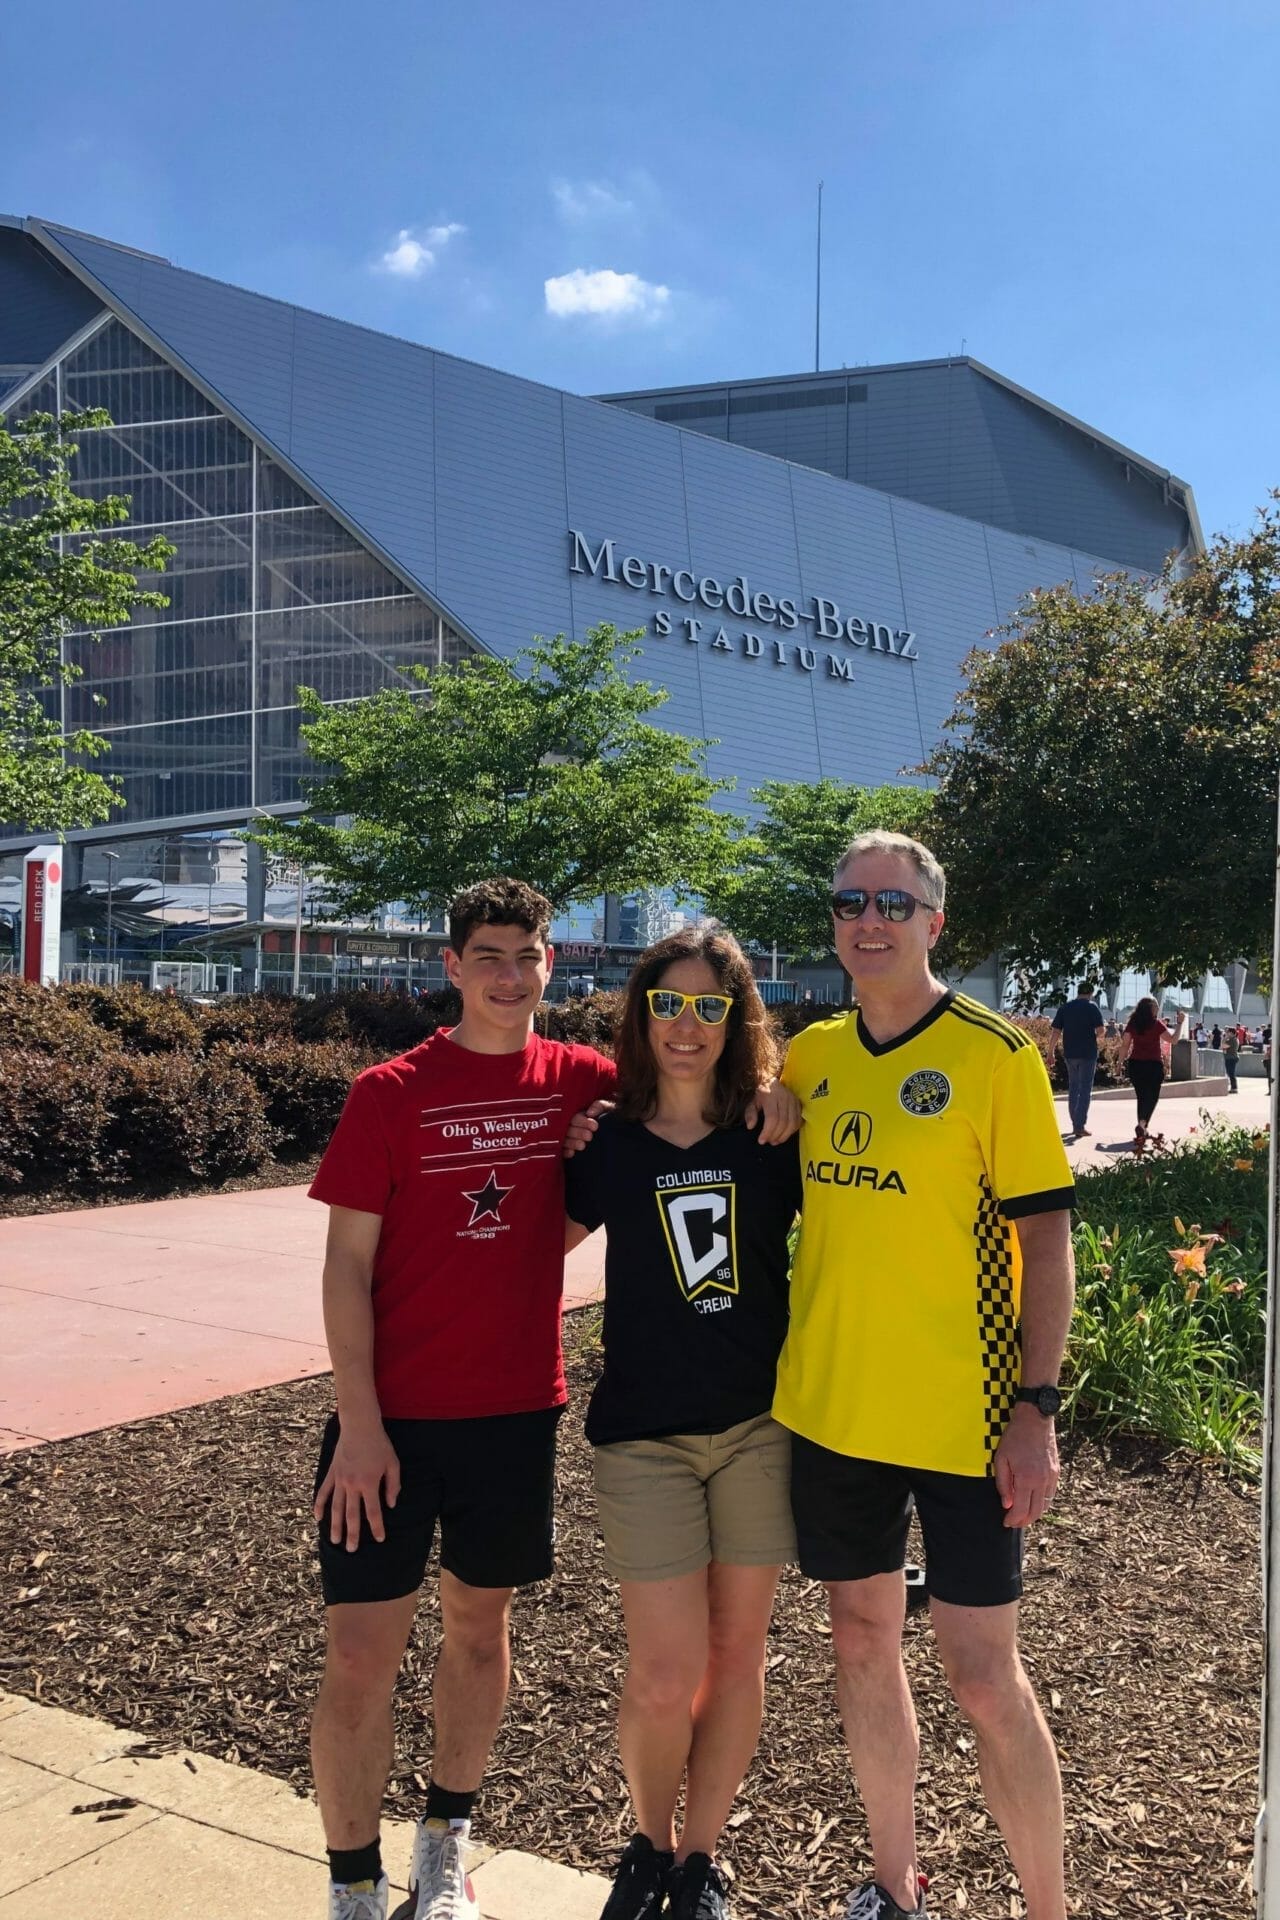 Dr. Eric Batterton and family pose in front of Mercedes-Benz Stadium